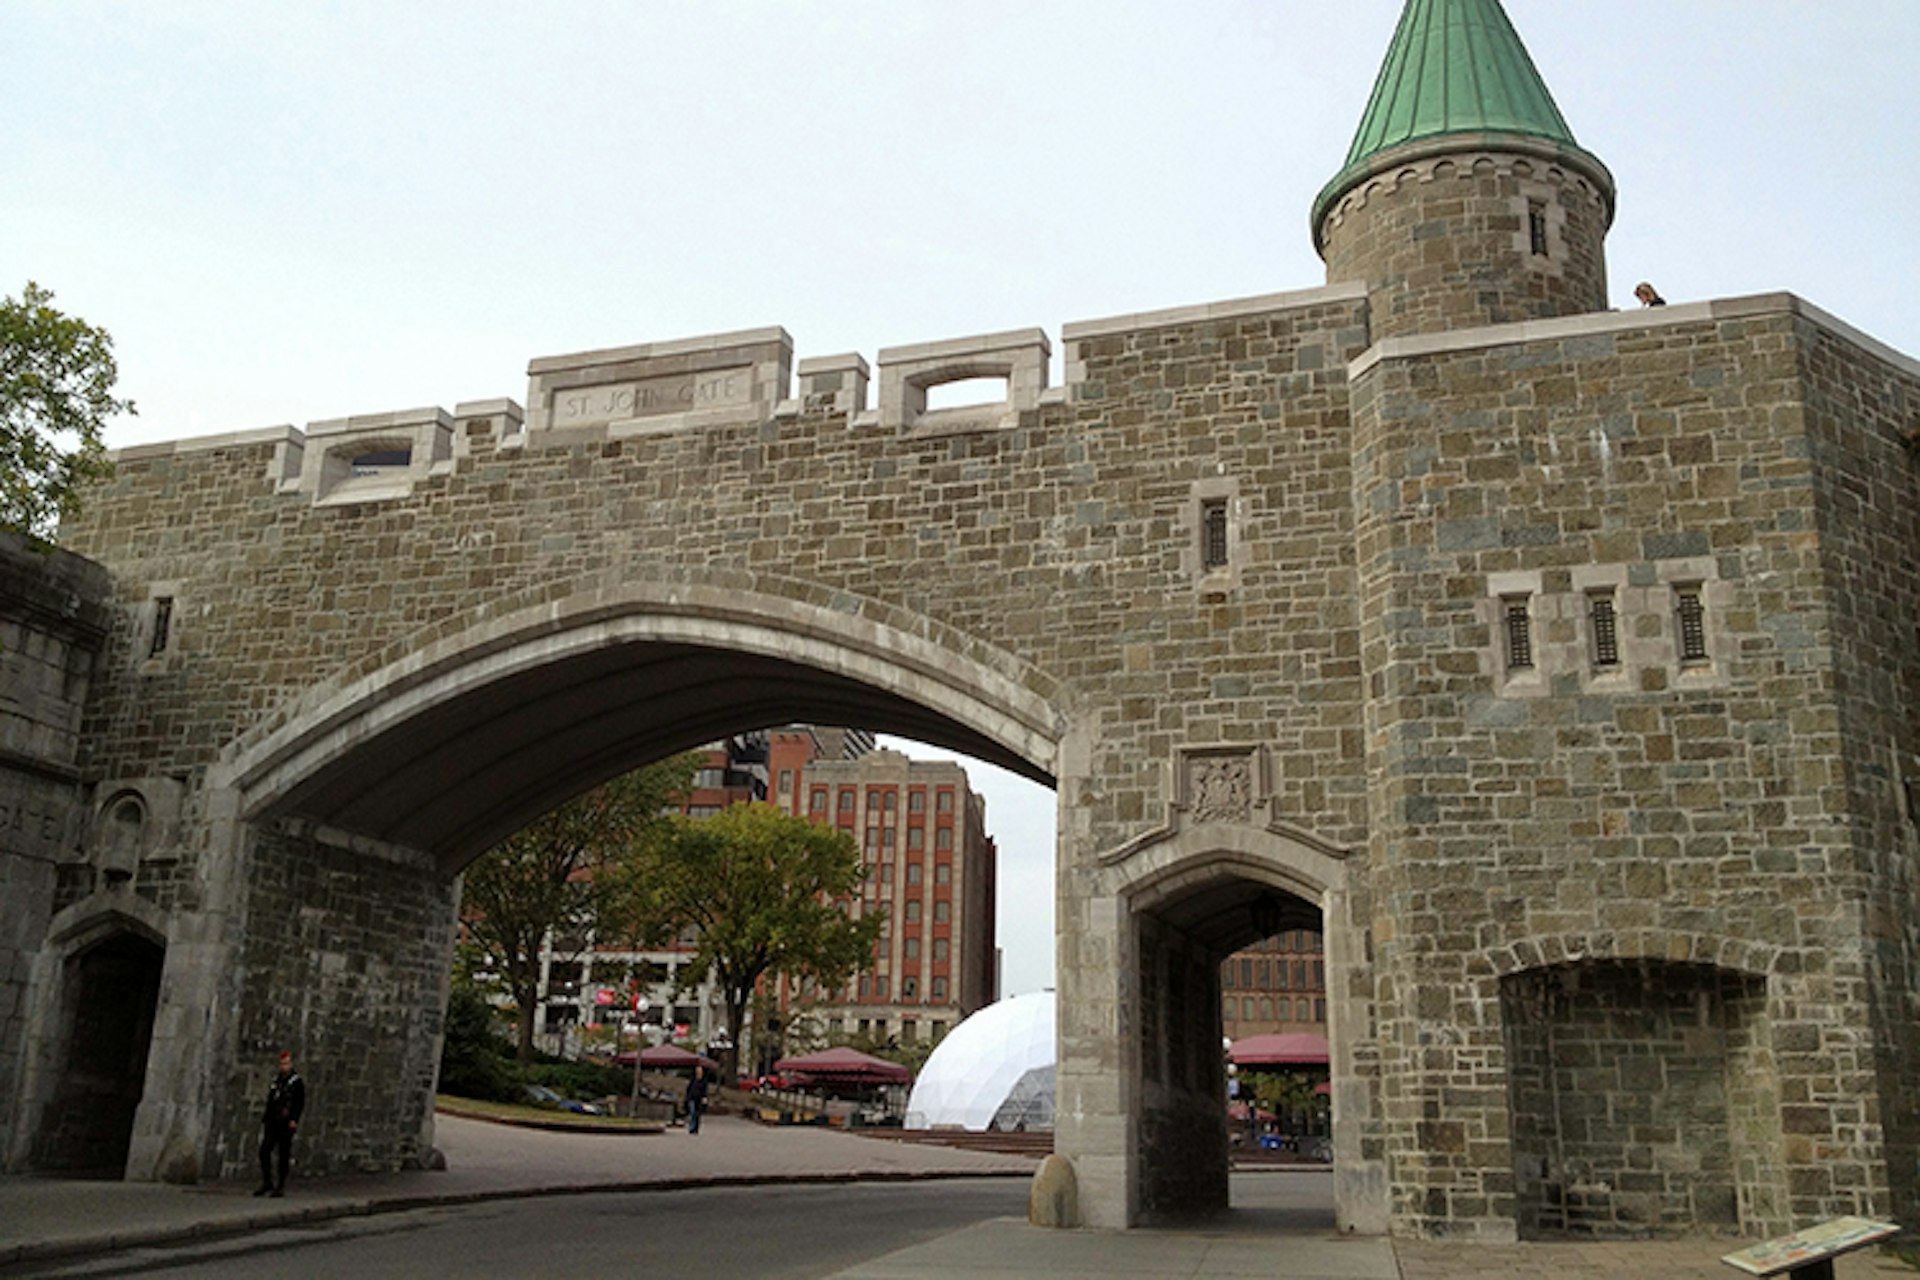 St John's Gate, one of the five remaining entrances into the walls of Québec City. Image by Tim Richards / Lonely Planet